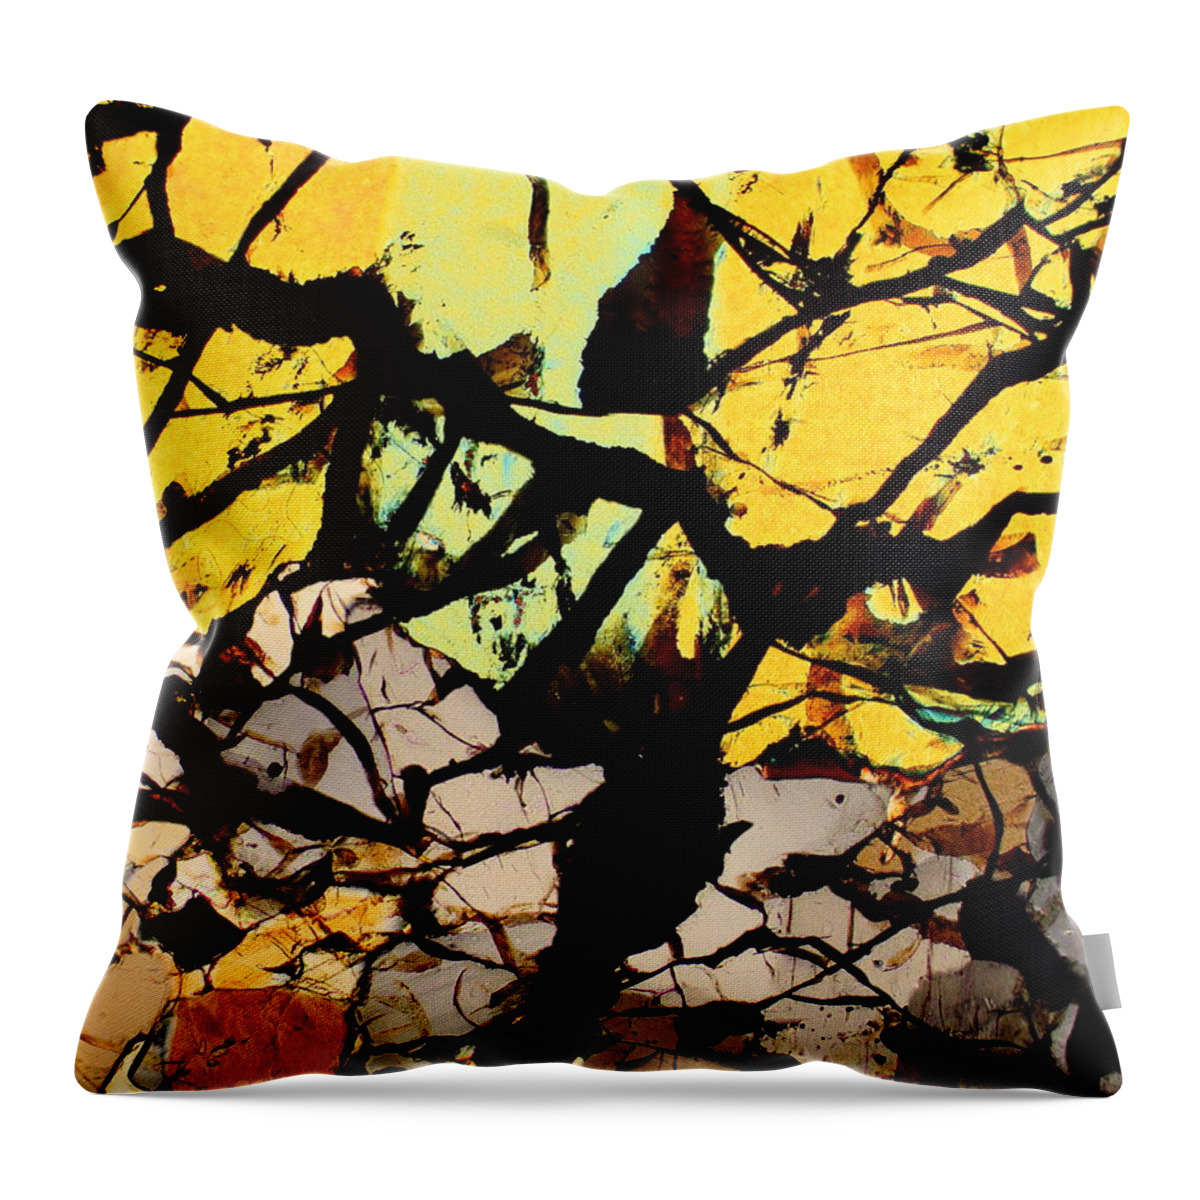 Meteorites Throw Pillow featuring the photograph All Hallows Eve by Hodges Jeffery